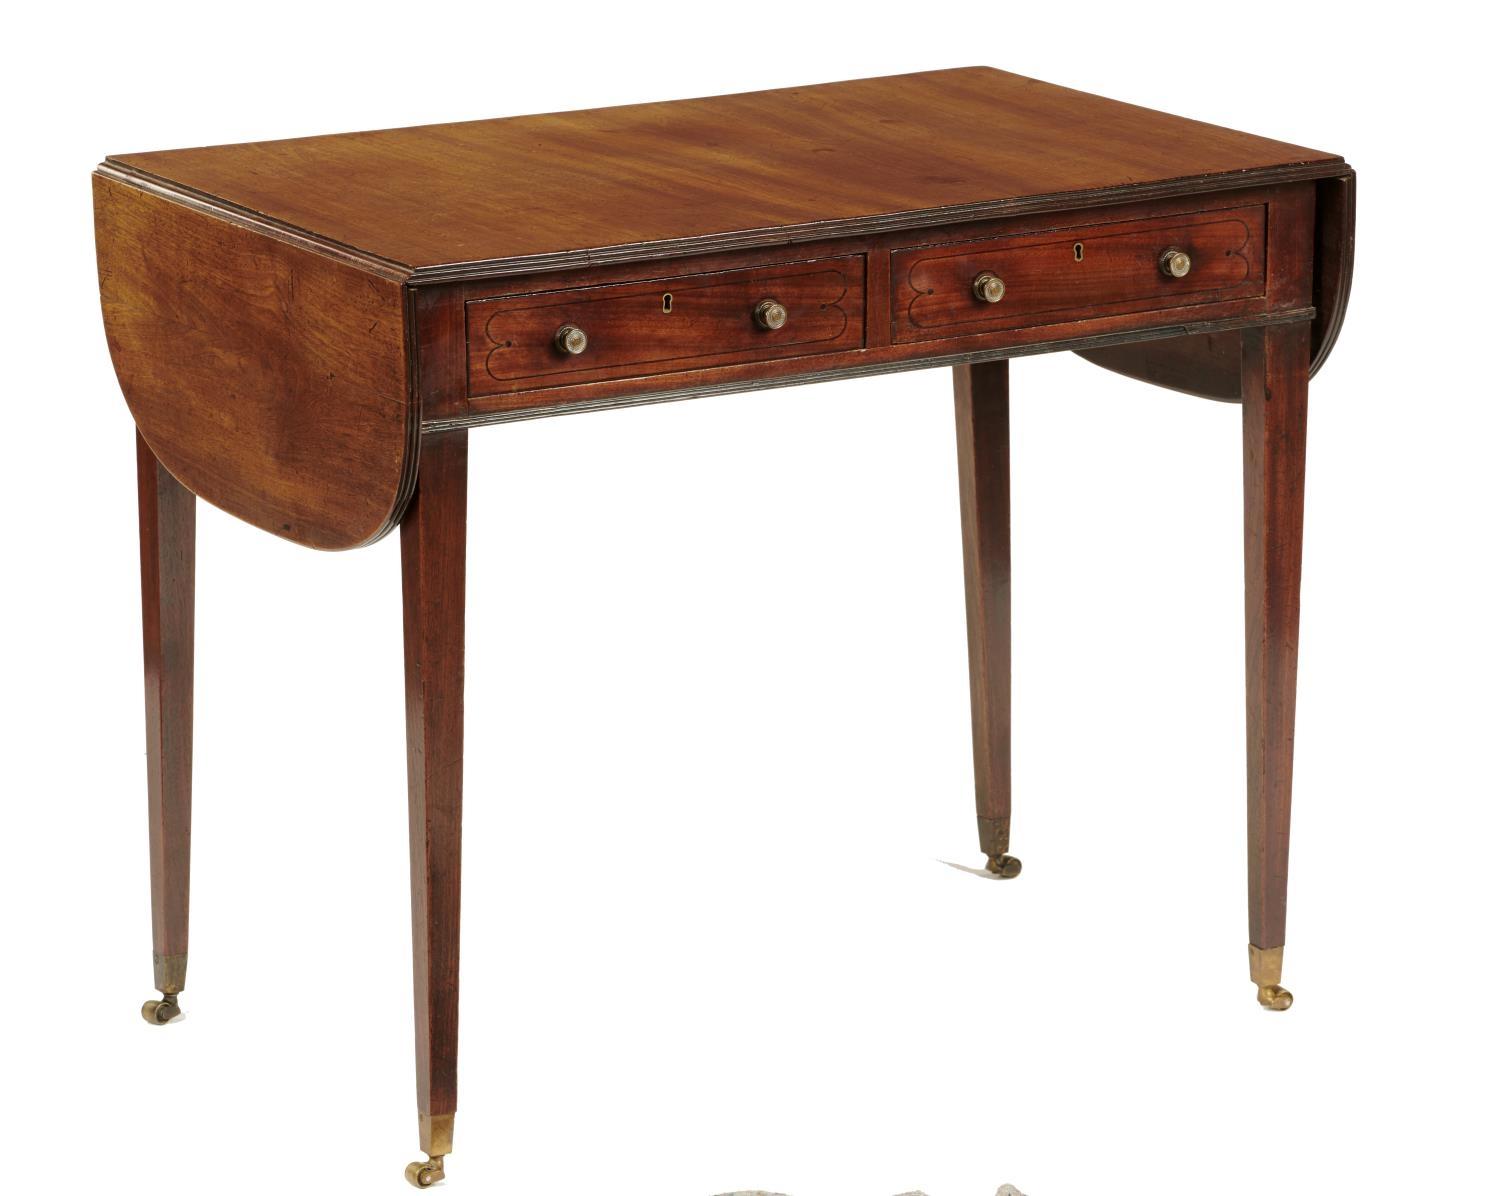 A REGENCY MAHOGANY AND EBONY LINE INLAID WRITING TABLE, EARLY 19TH C with drop leaf top, two drawers